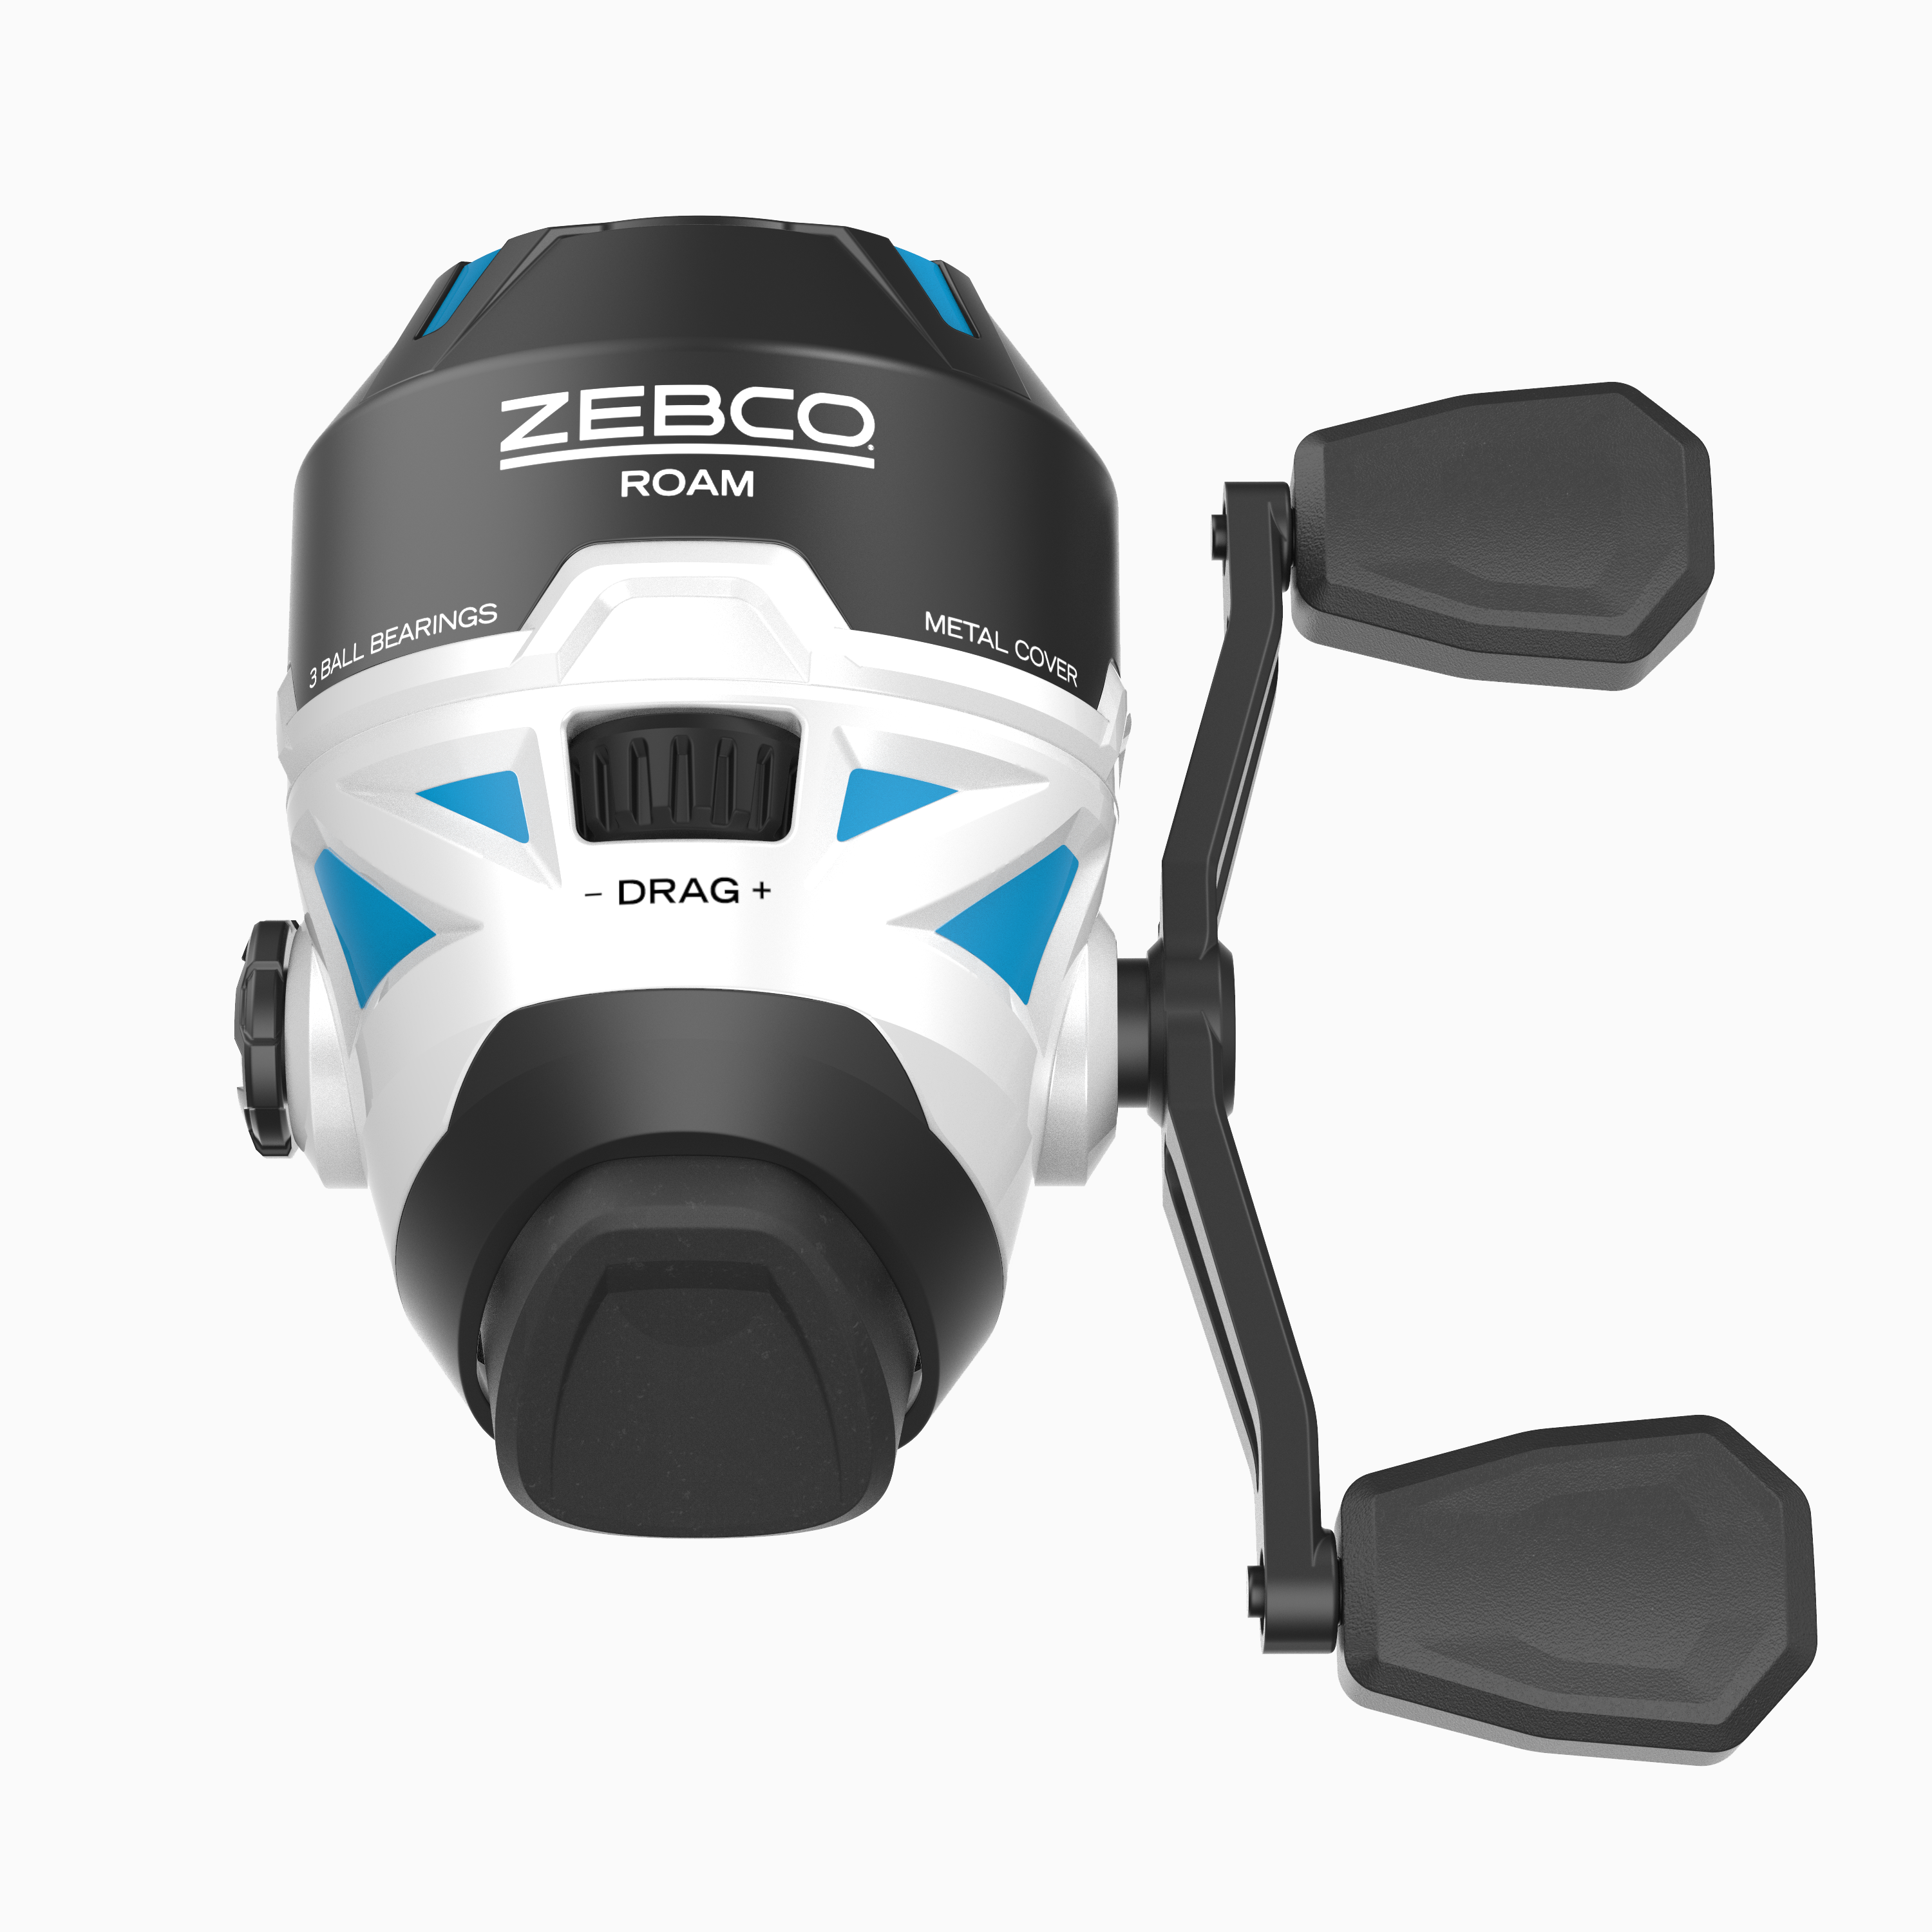 Zebco Stinger Spinning Fishing Reel, Size 10 Changeable Right- or Left-Hand  Retrieve, All-Metal Gears, Ball Bearing System, Pre-Spooled with 6-Pound  Zebco Line, Silver/Black 